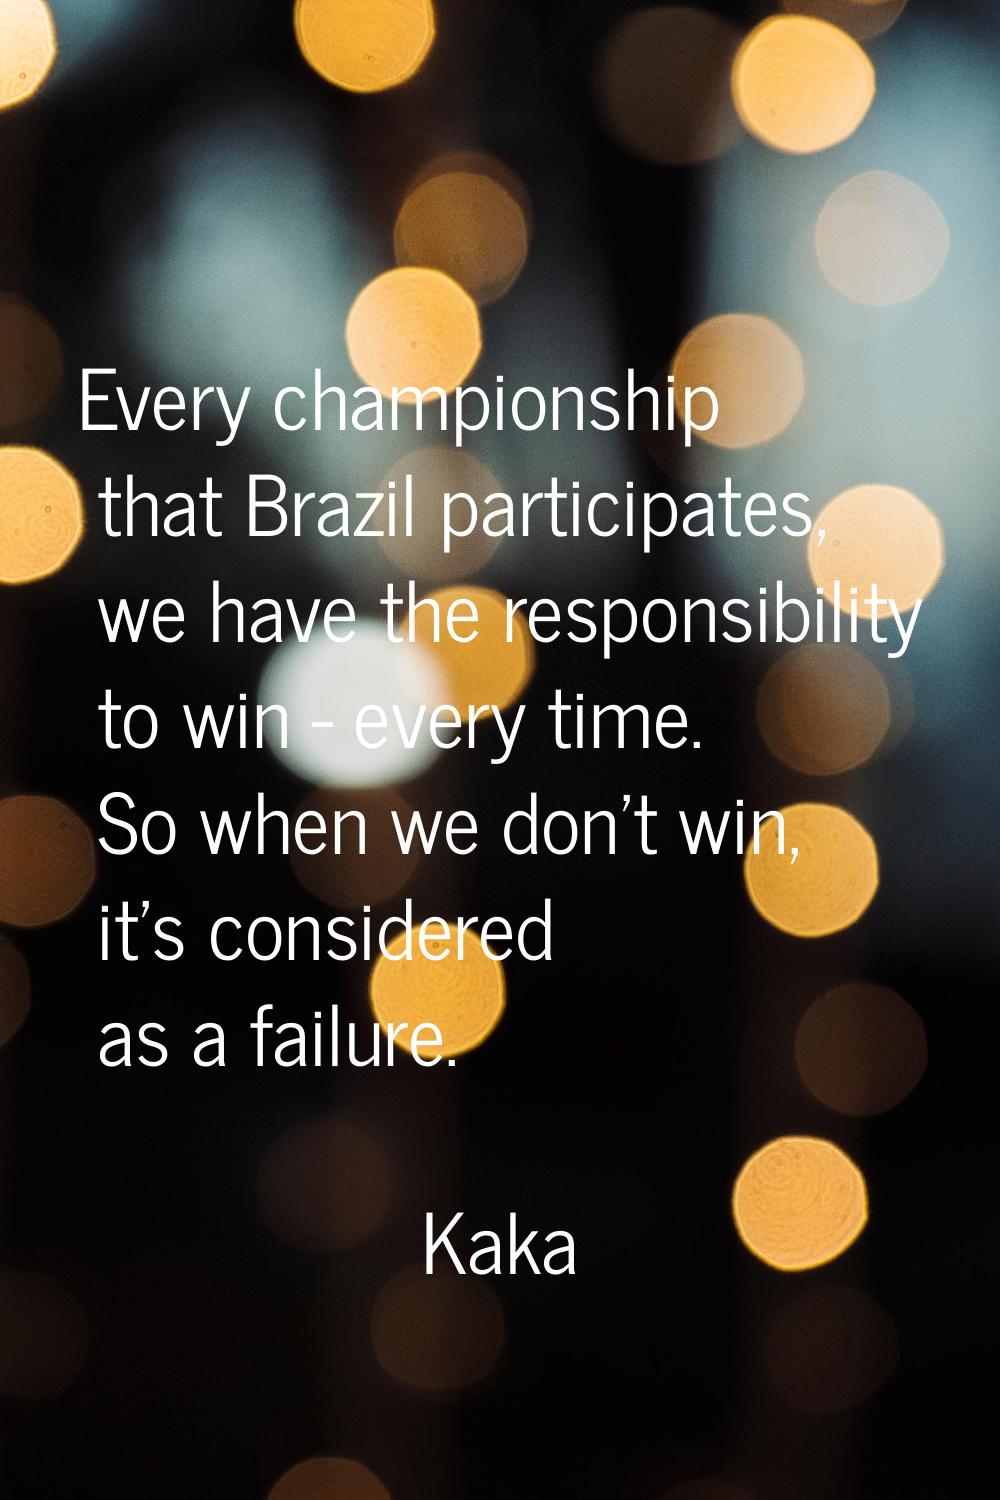 Every championship that Brazil participates, we have the responsibility to win - every time. So whe